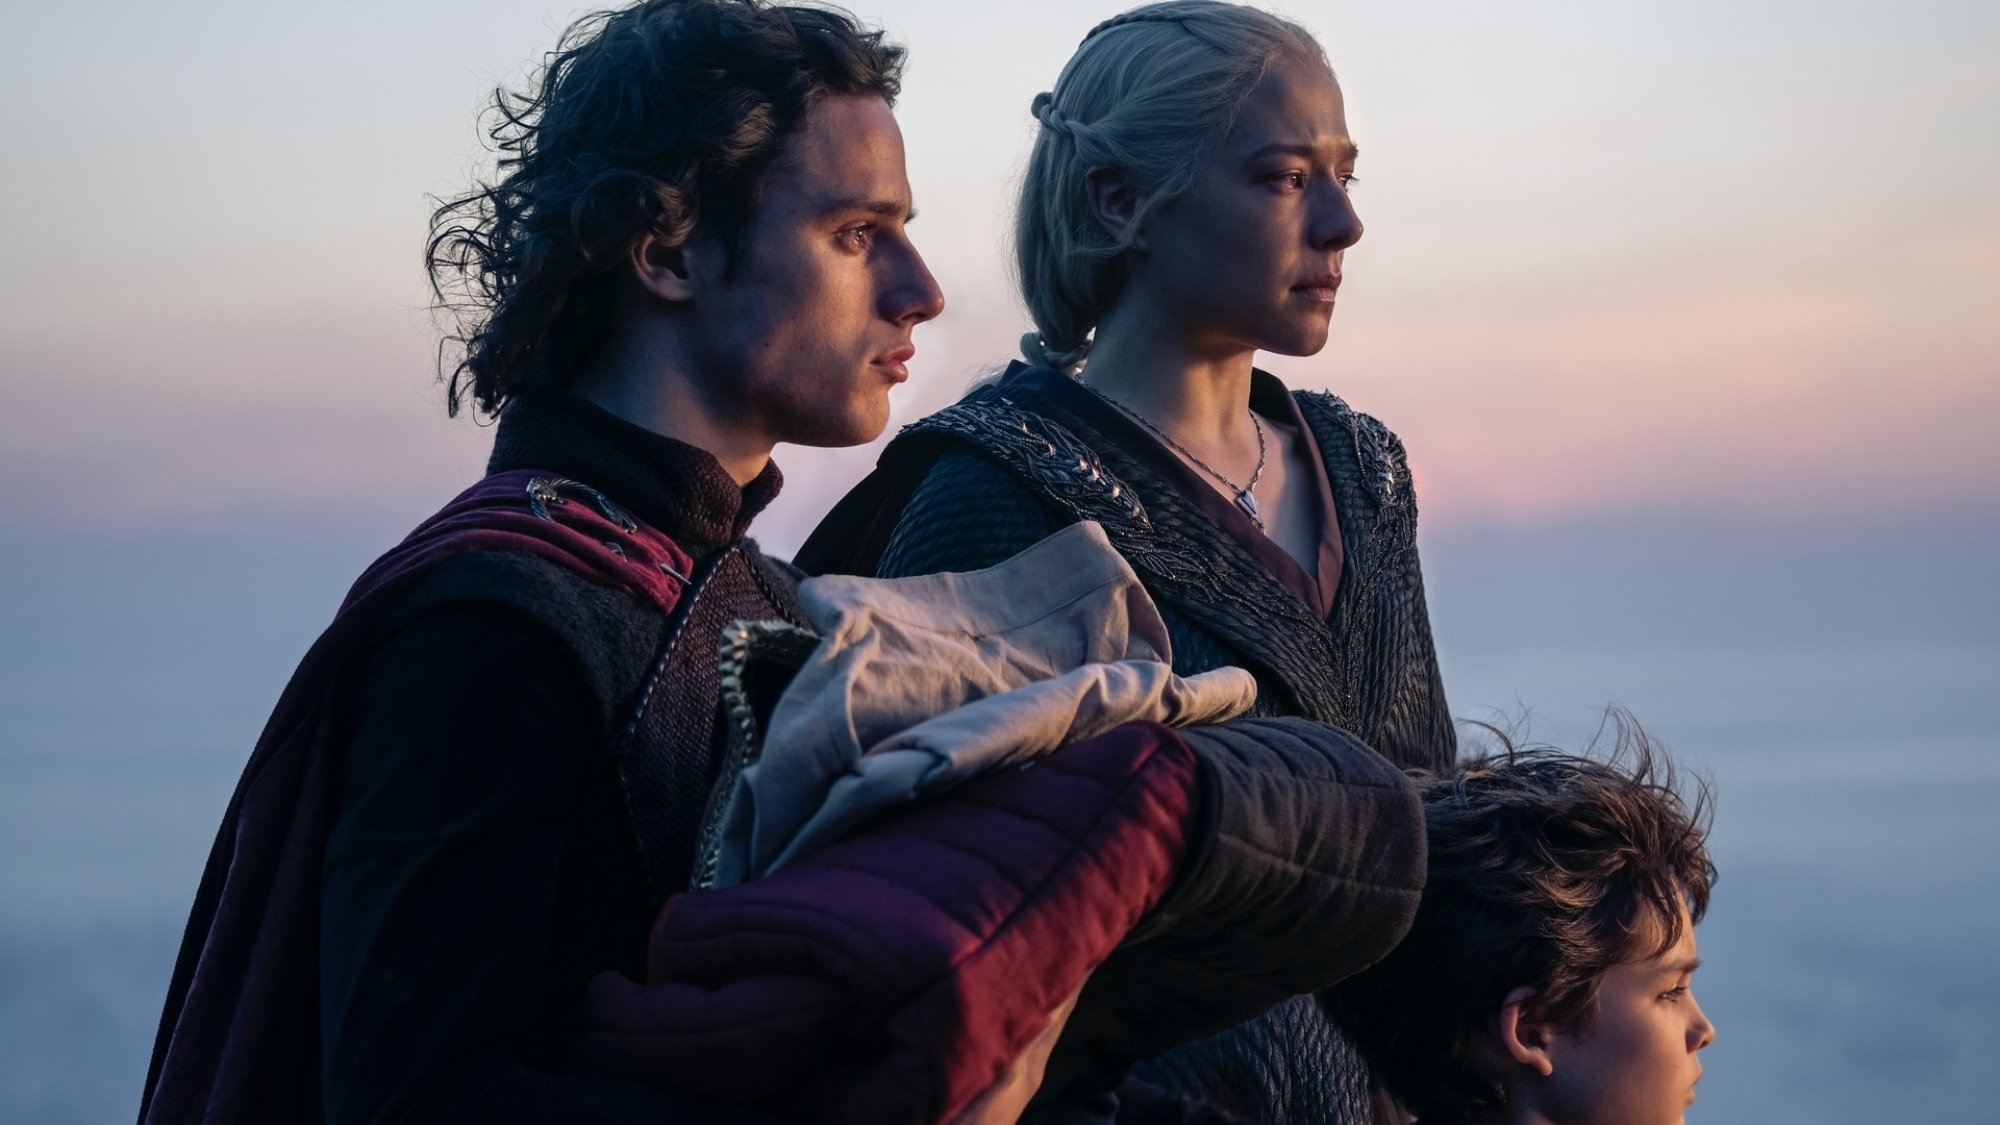 Jacaerys, Rhaenyra, and Joffrey stand together with their backs to the sea at sunset.